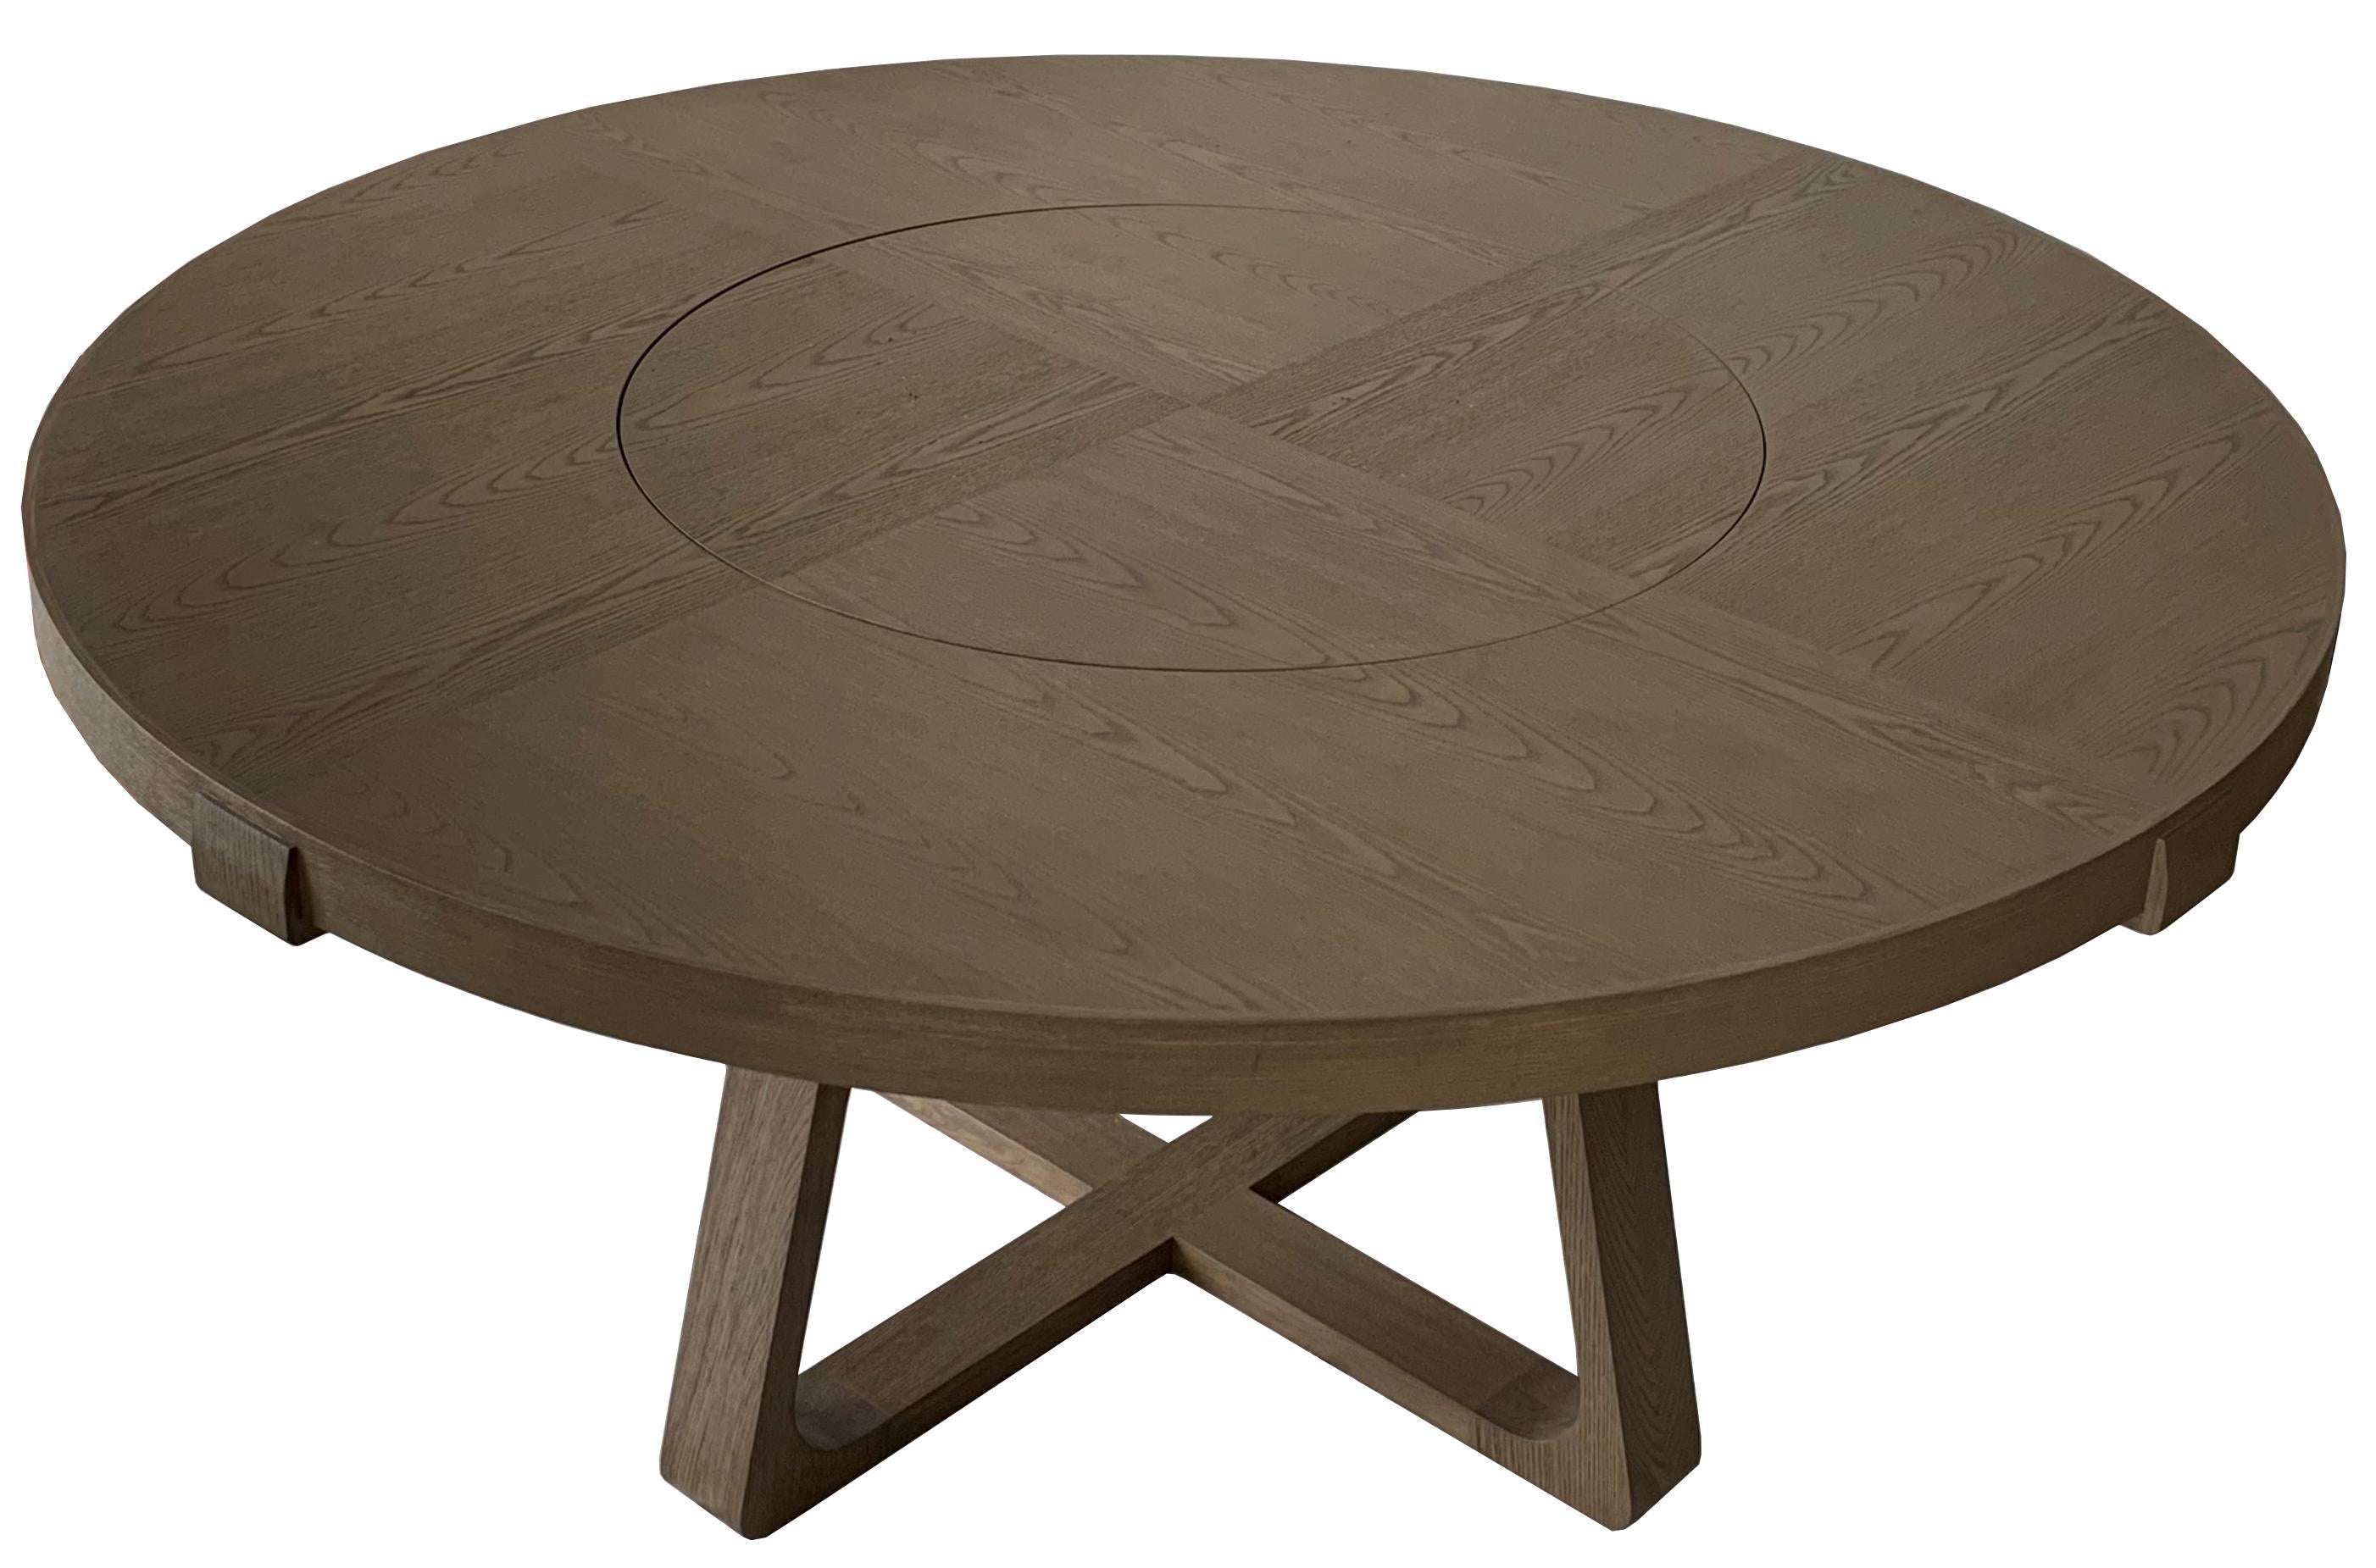 Round wooden dining table 180cm with Lazy Susan in the middle.
Removable Lazy Susan for cleaning purpose.
Available other sizes upon request.
Available without Lazy Susan.

Description: Round dining table with Lazy Susan
Color: Grey
Size: 180Ø x 73H